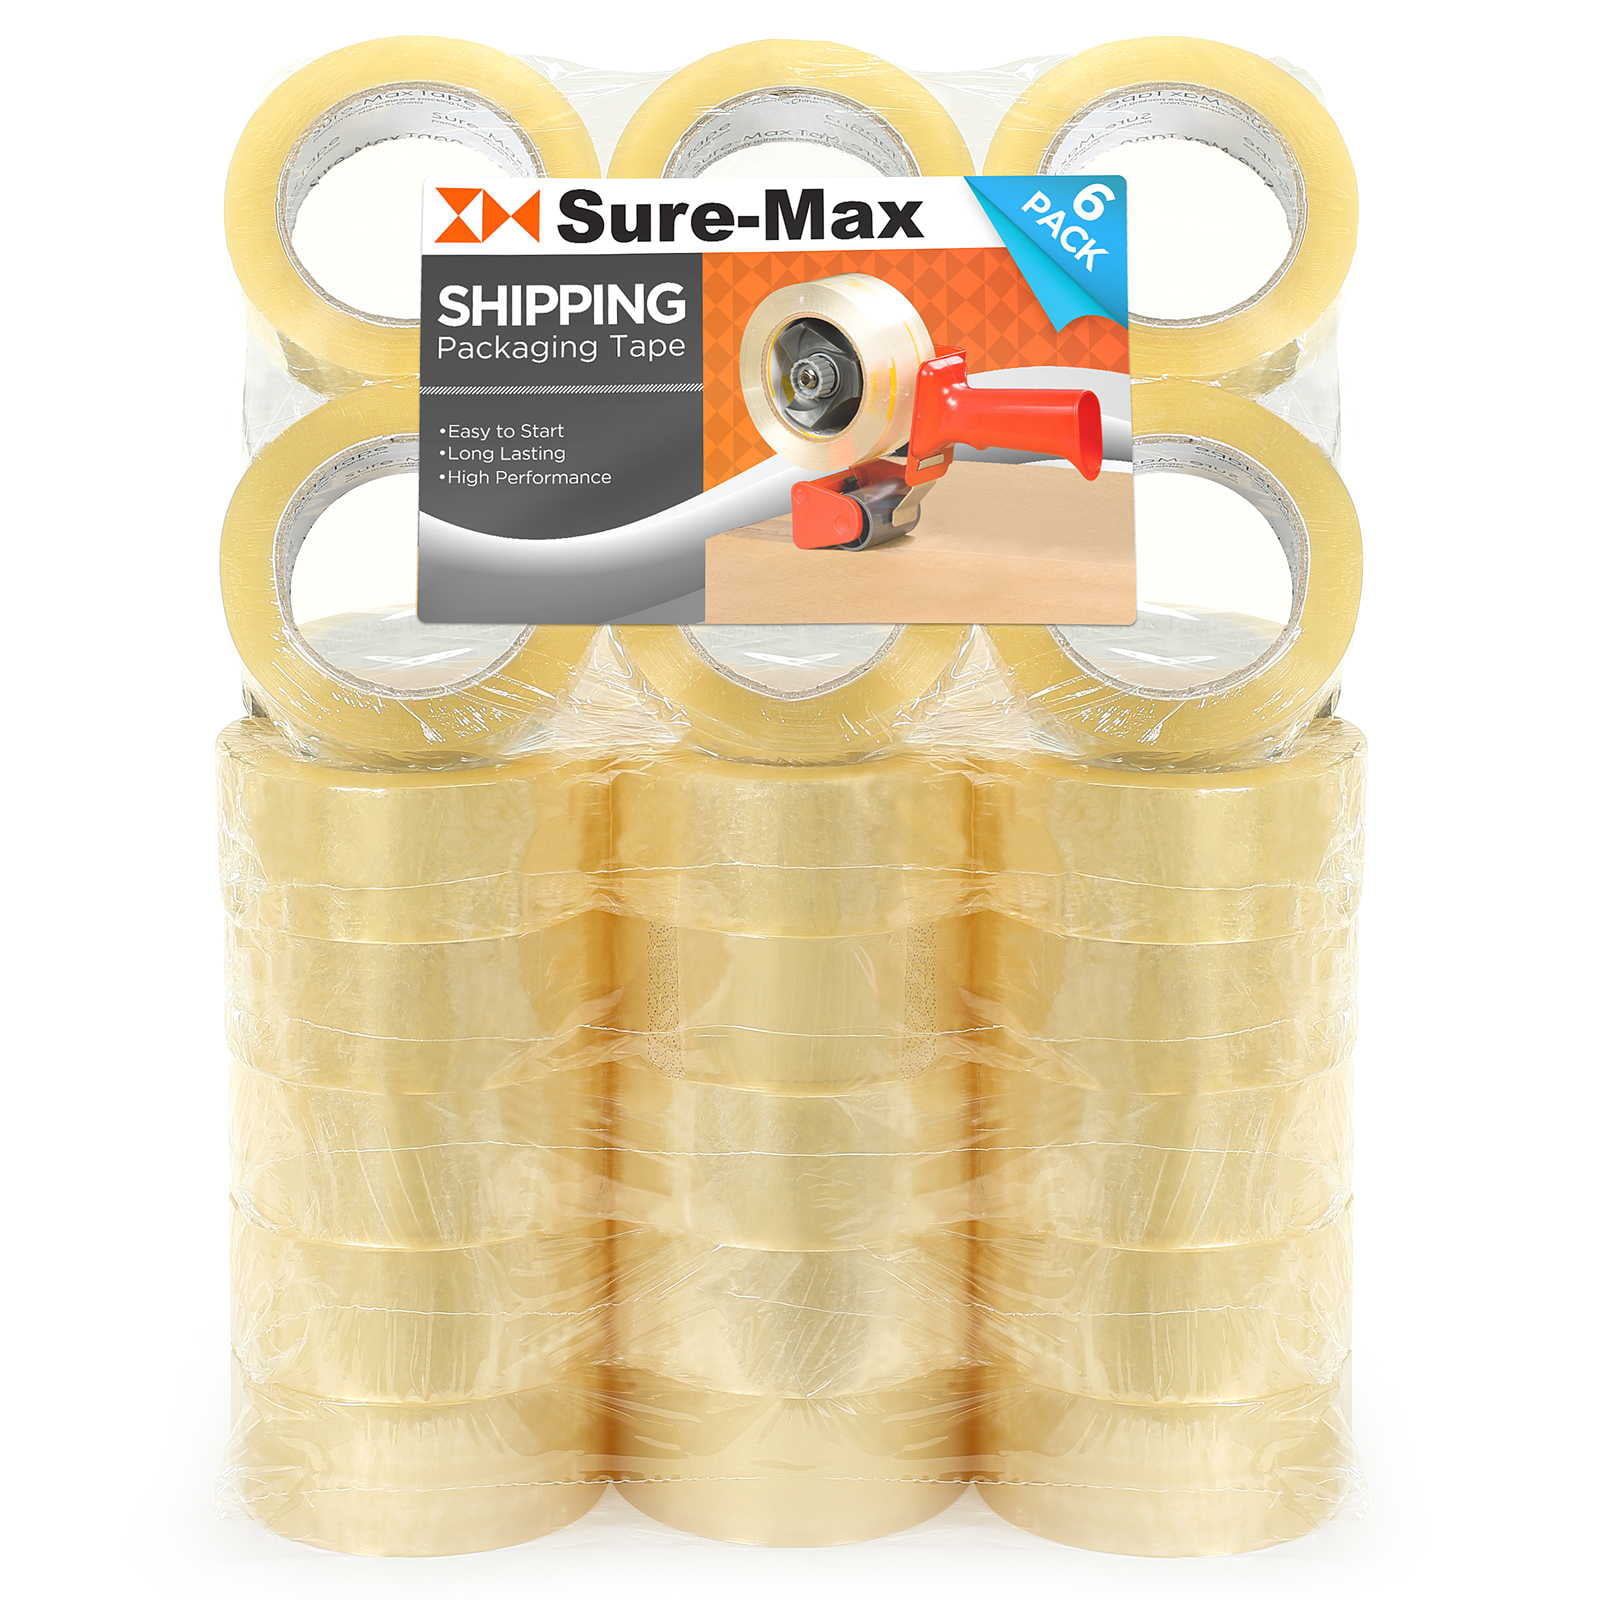 Pack Tape Tape Parcel Tape Clear-Quiet 50m 50mm 70my 1,20 €/100M. 36Rl 